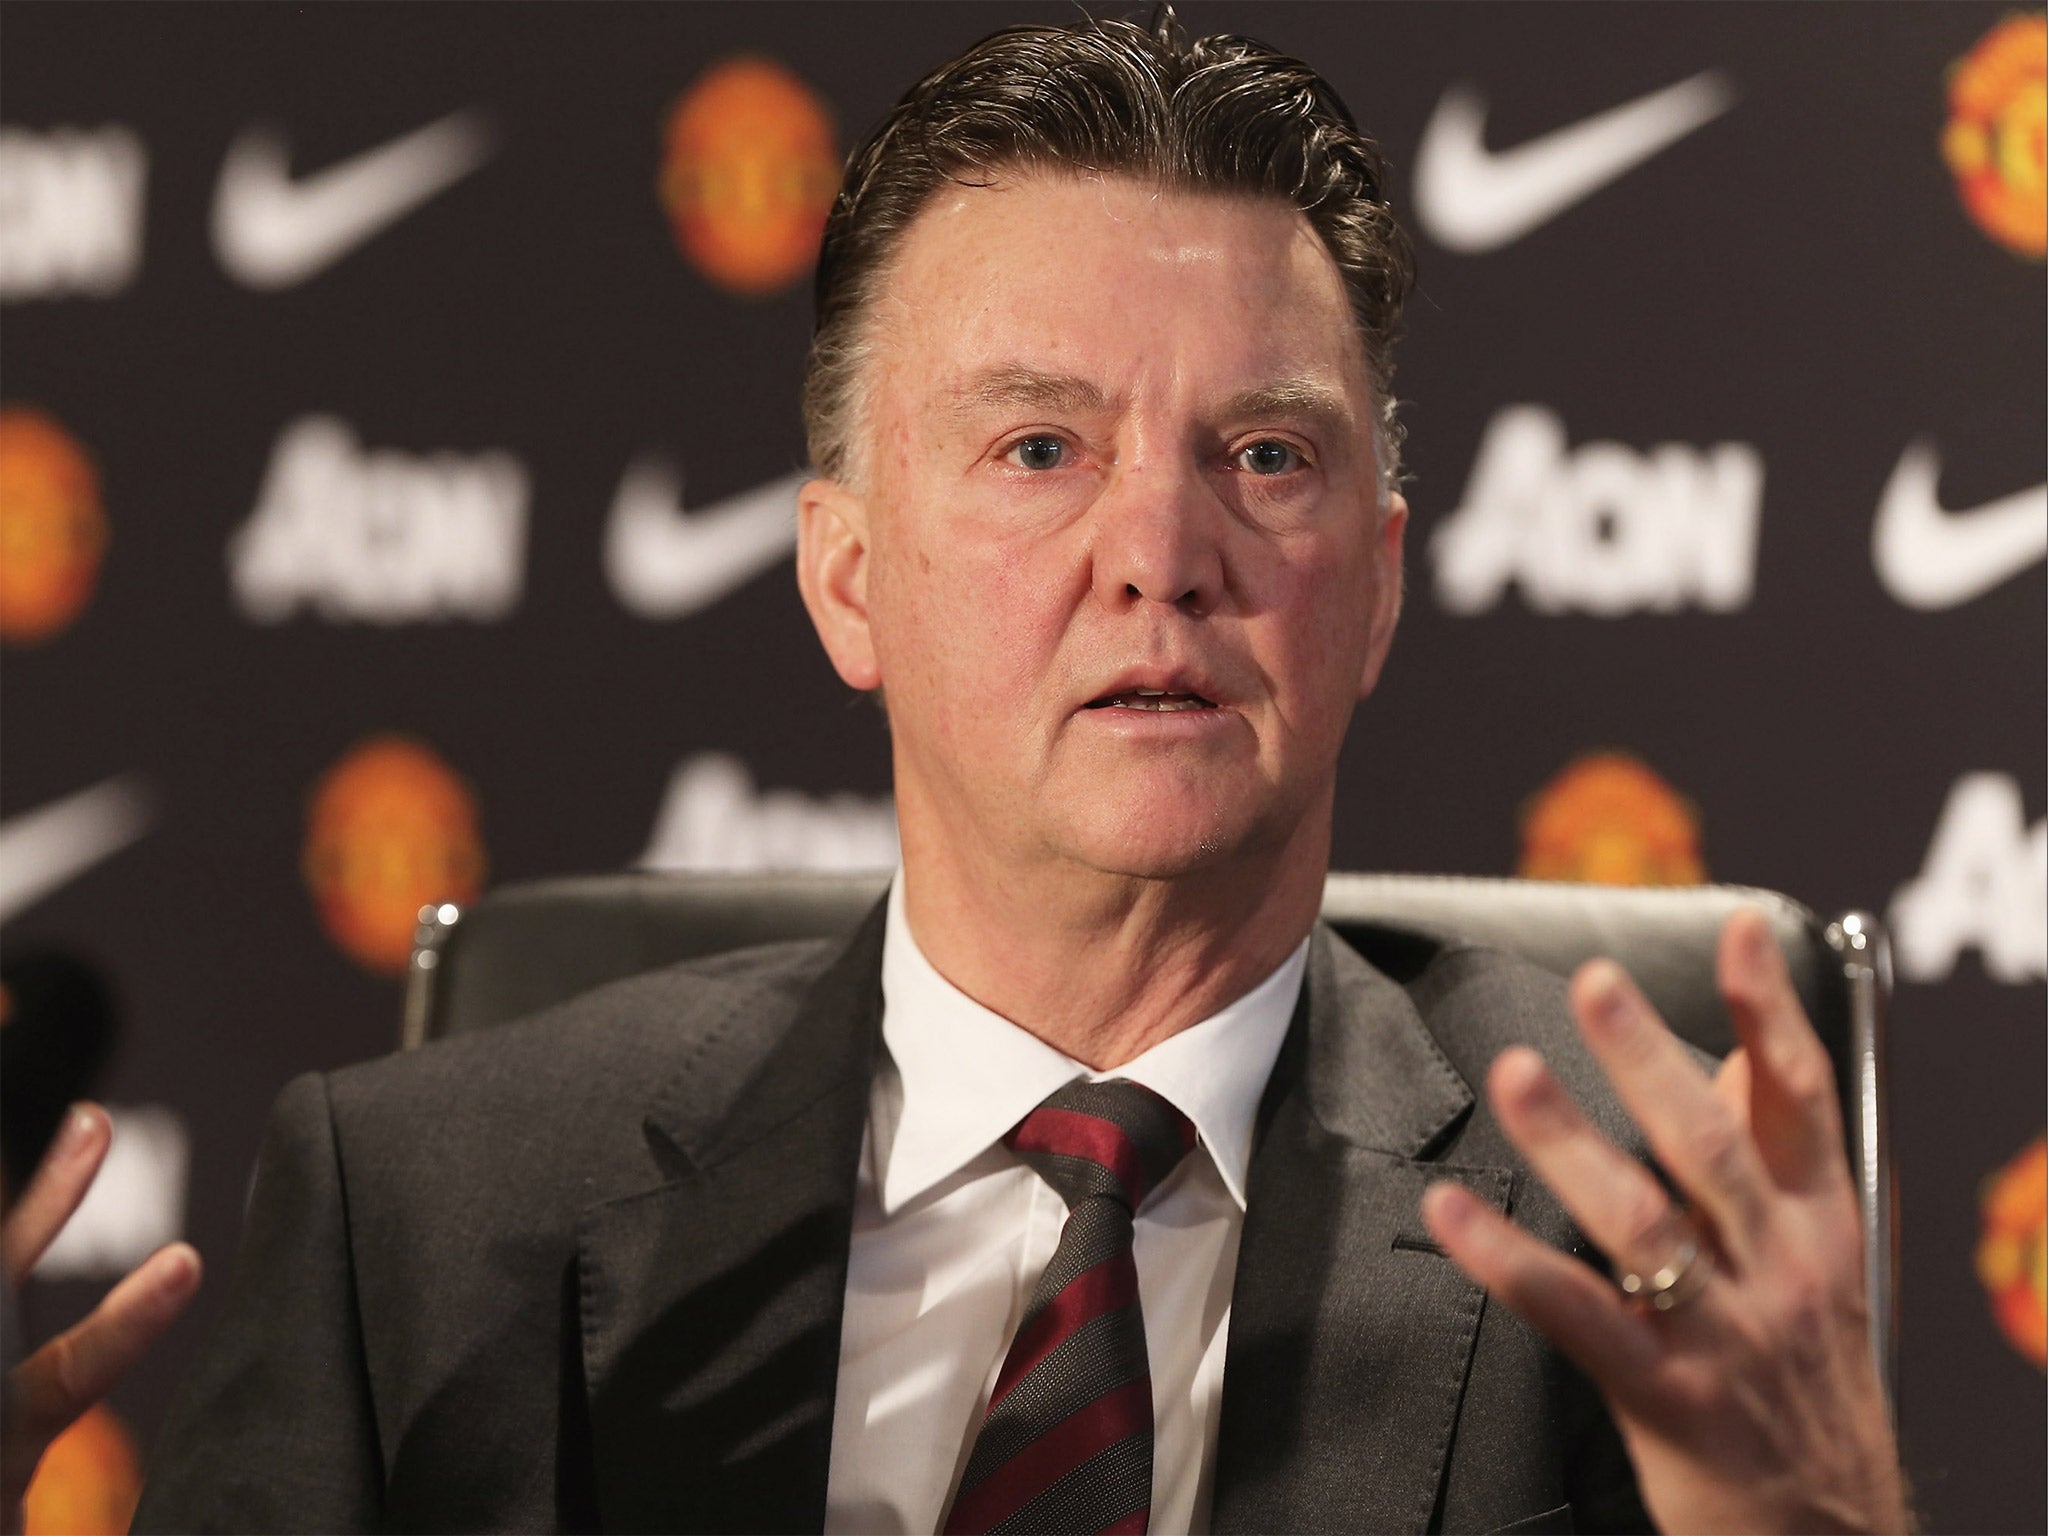 Louis Van Gaal’s first objective of 2015 will be to stretch United’s unbeaten run to 10 games at Stoke